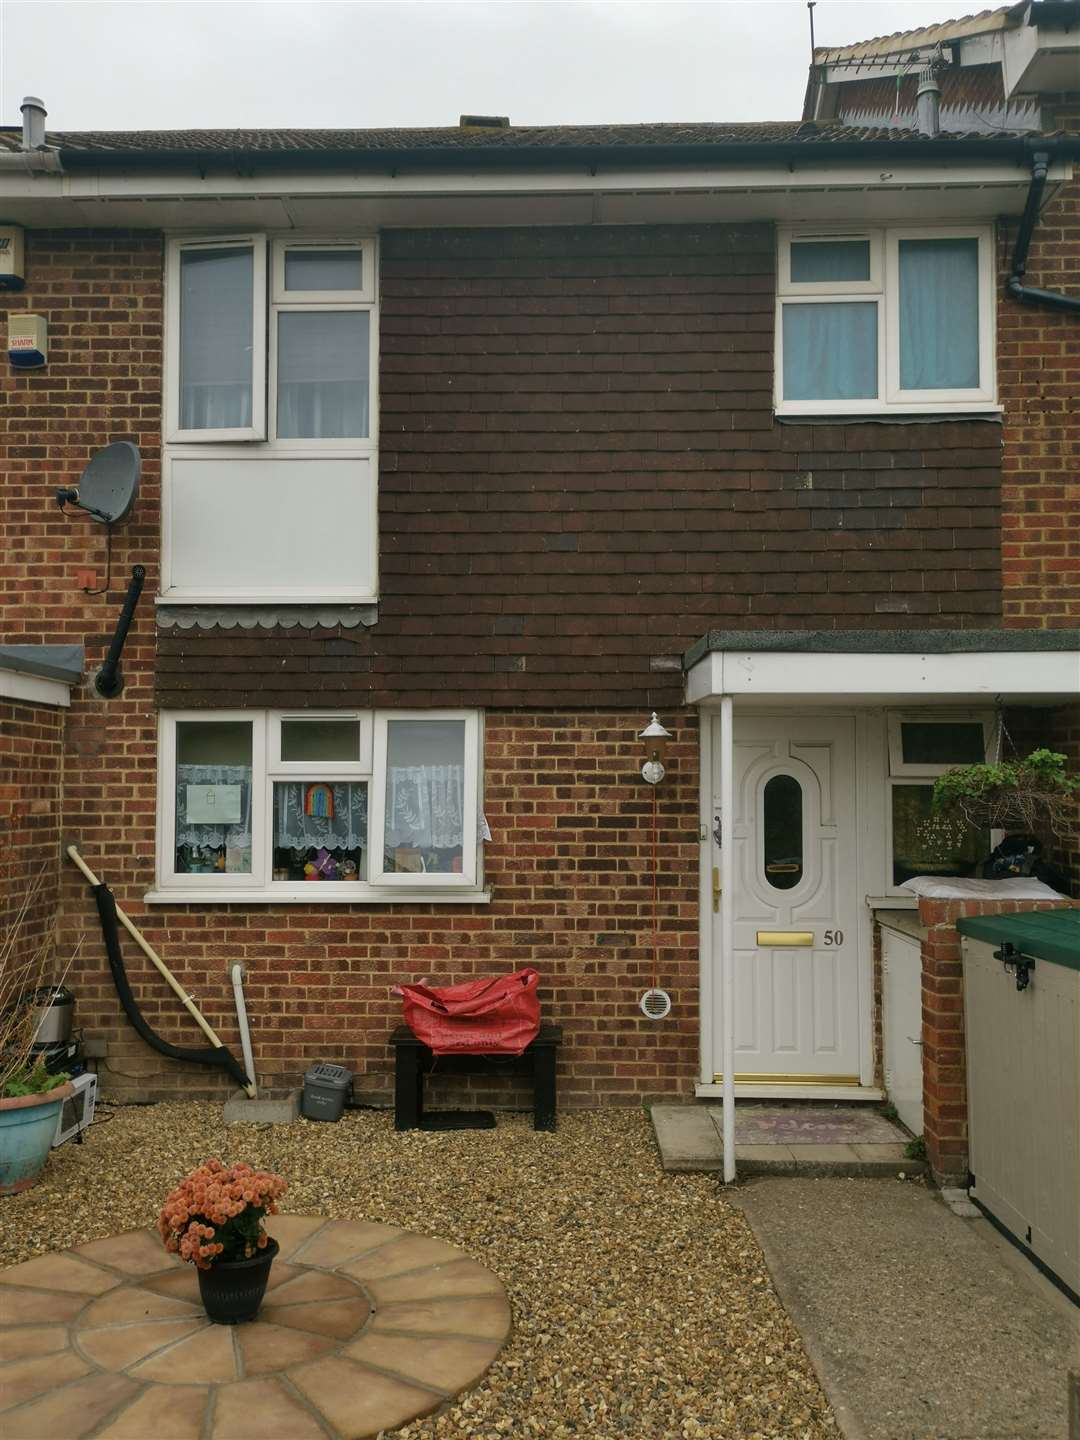 Peter Tobin's former home in Irvine Drive in Margate, where his victims were found buried